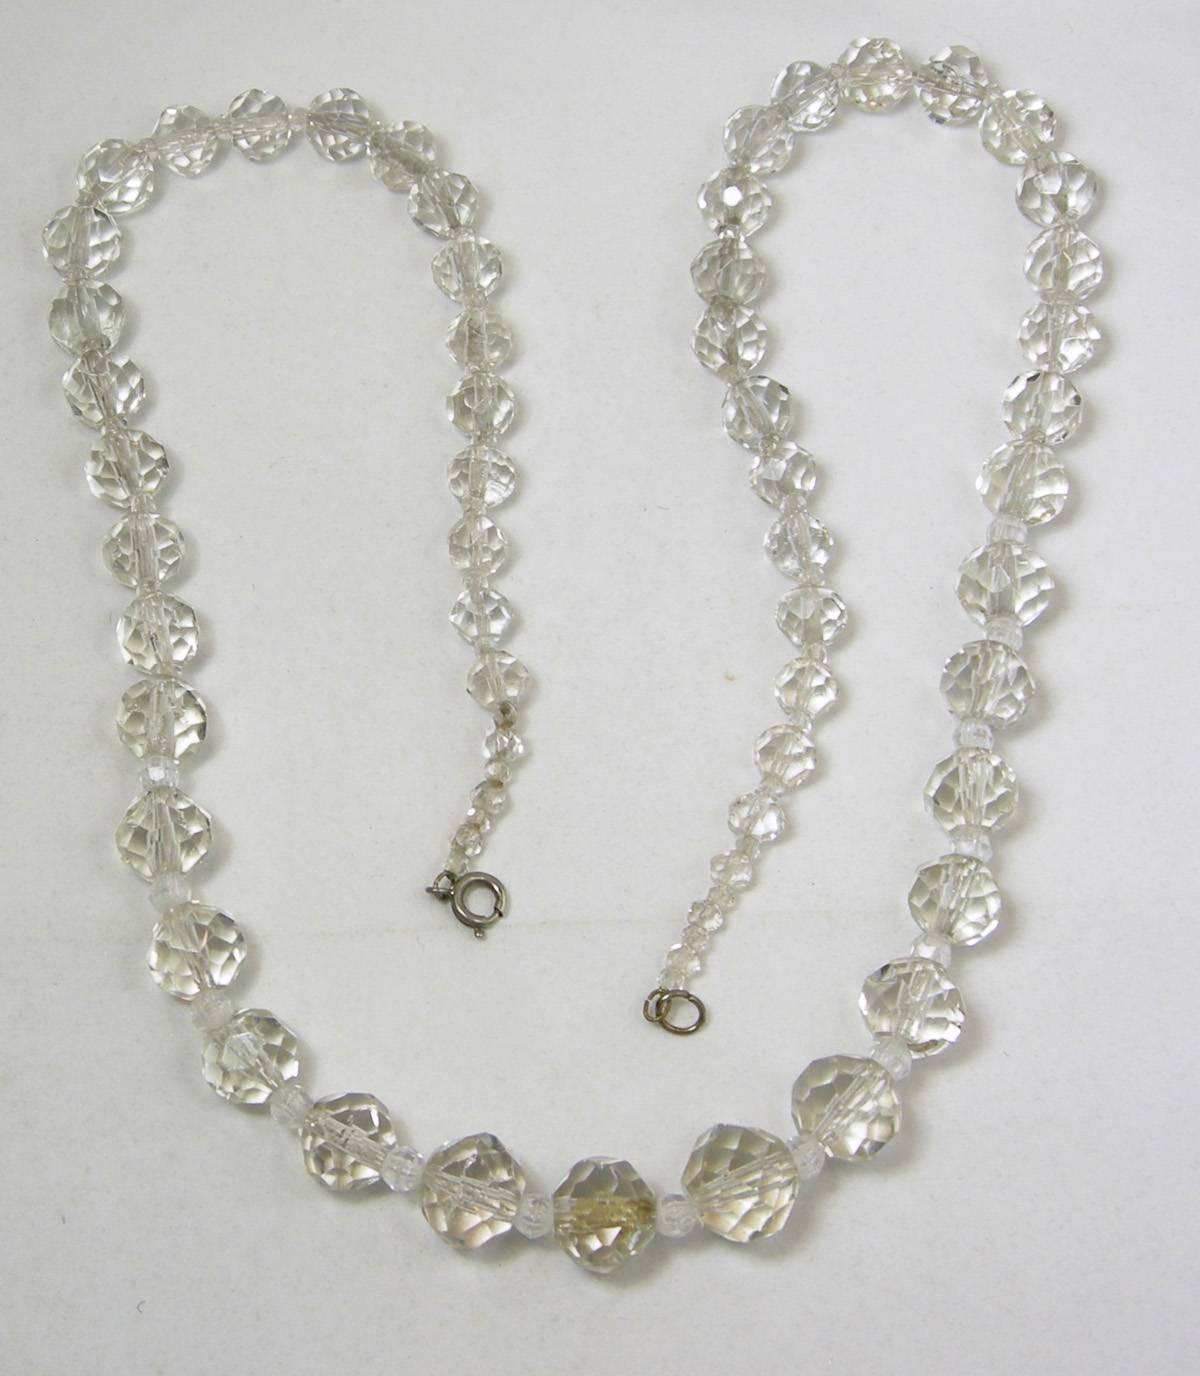 Vintage 1940s Crystal Bead Necklace at 1stdibs